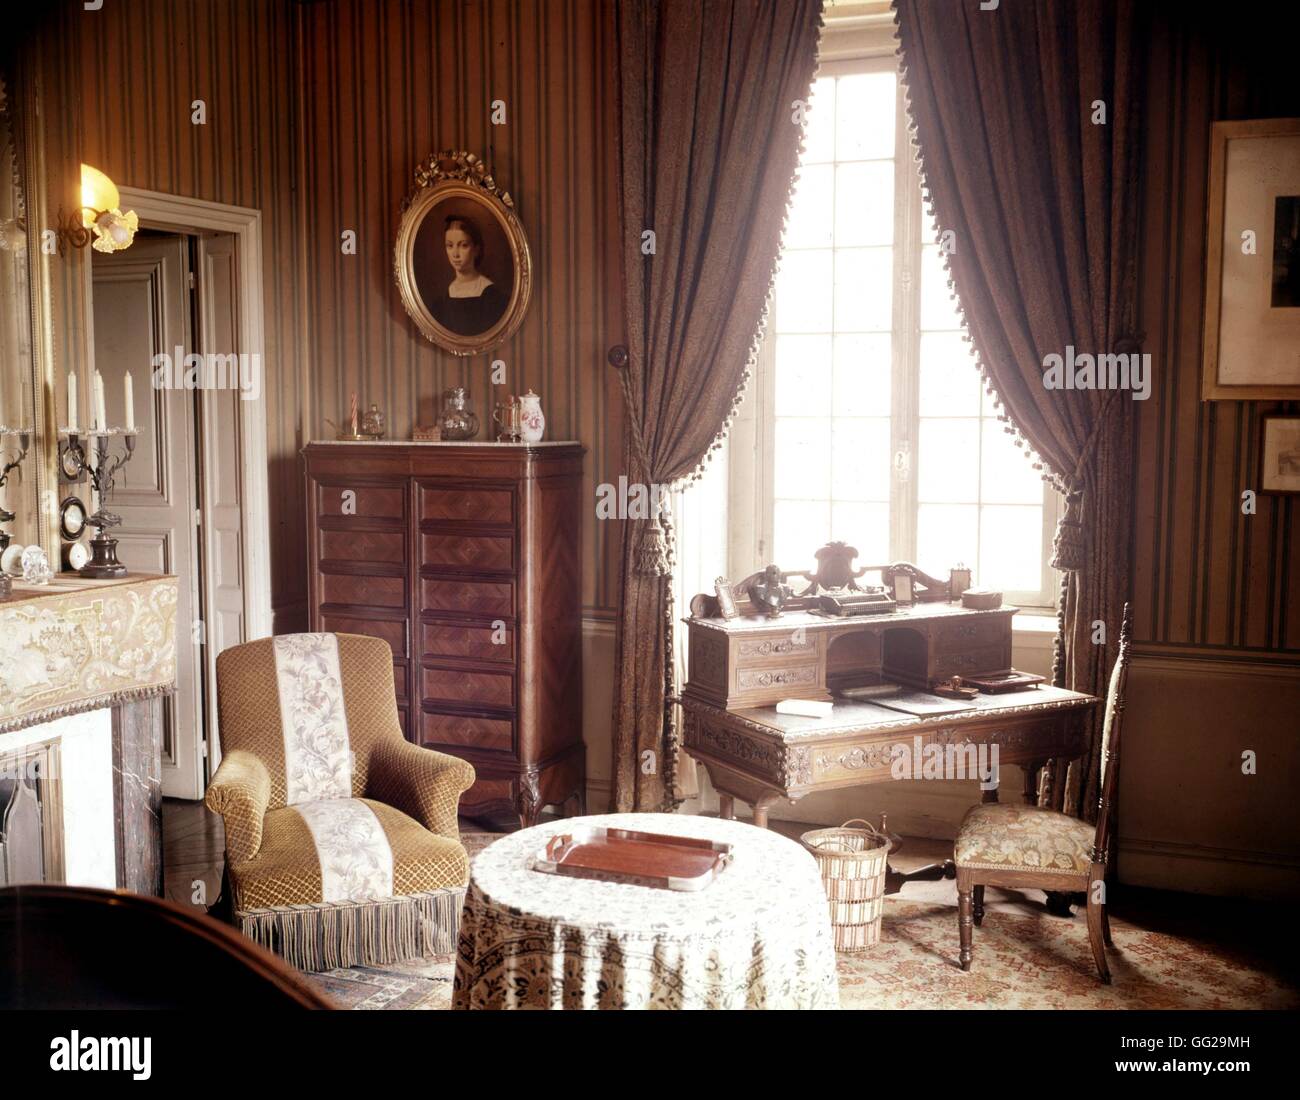 Louis Pasteur's bedroom, the way it was when he used to live there France 1864 Musée Pasteur Stock Photo